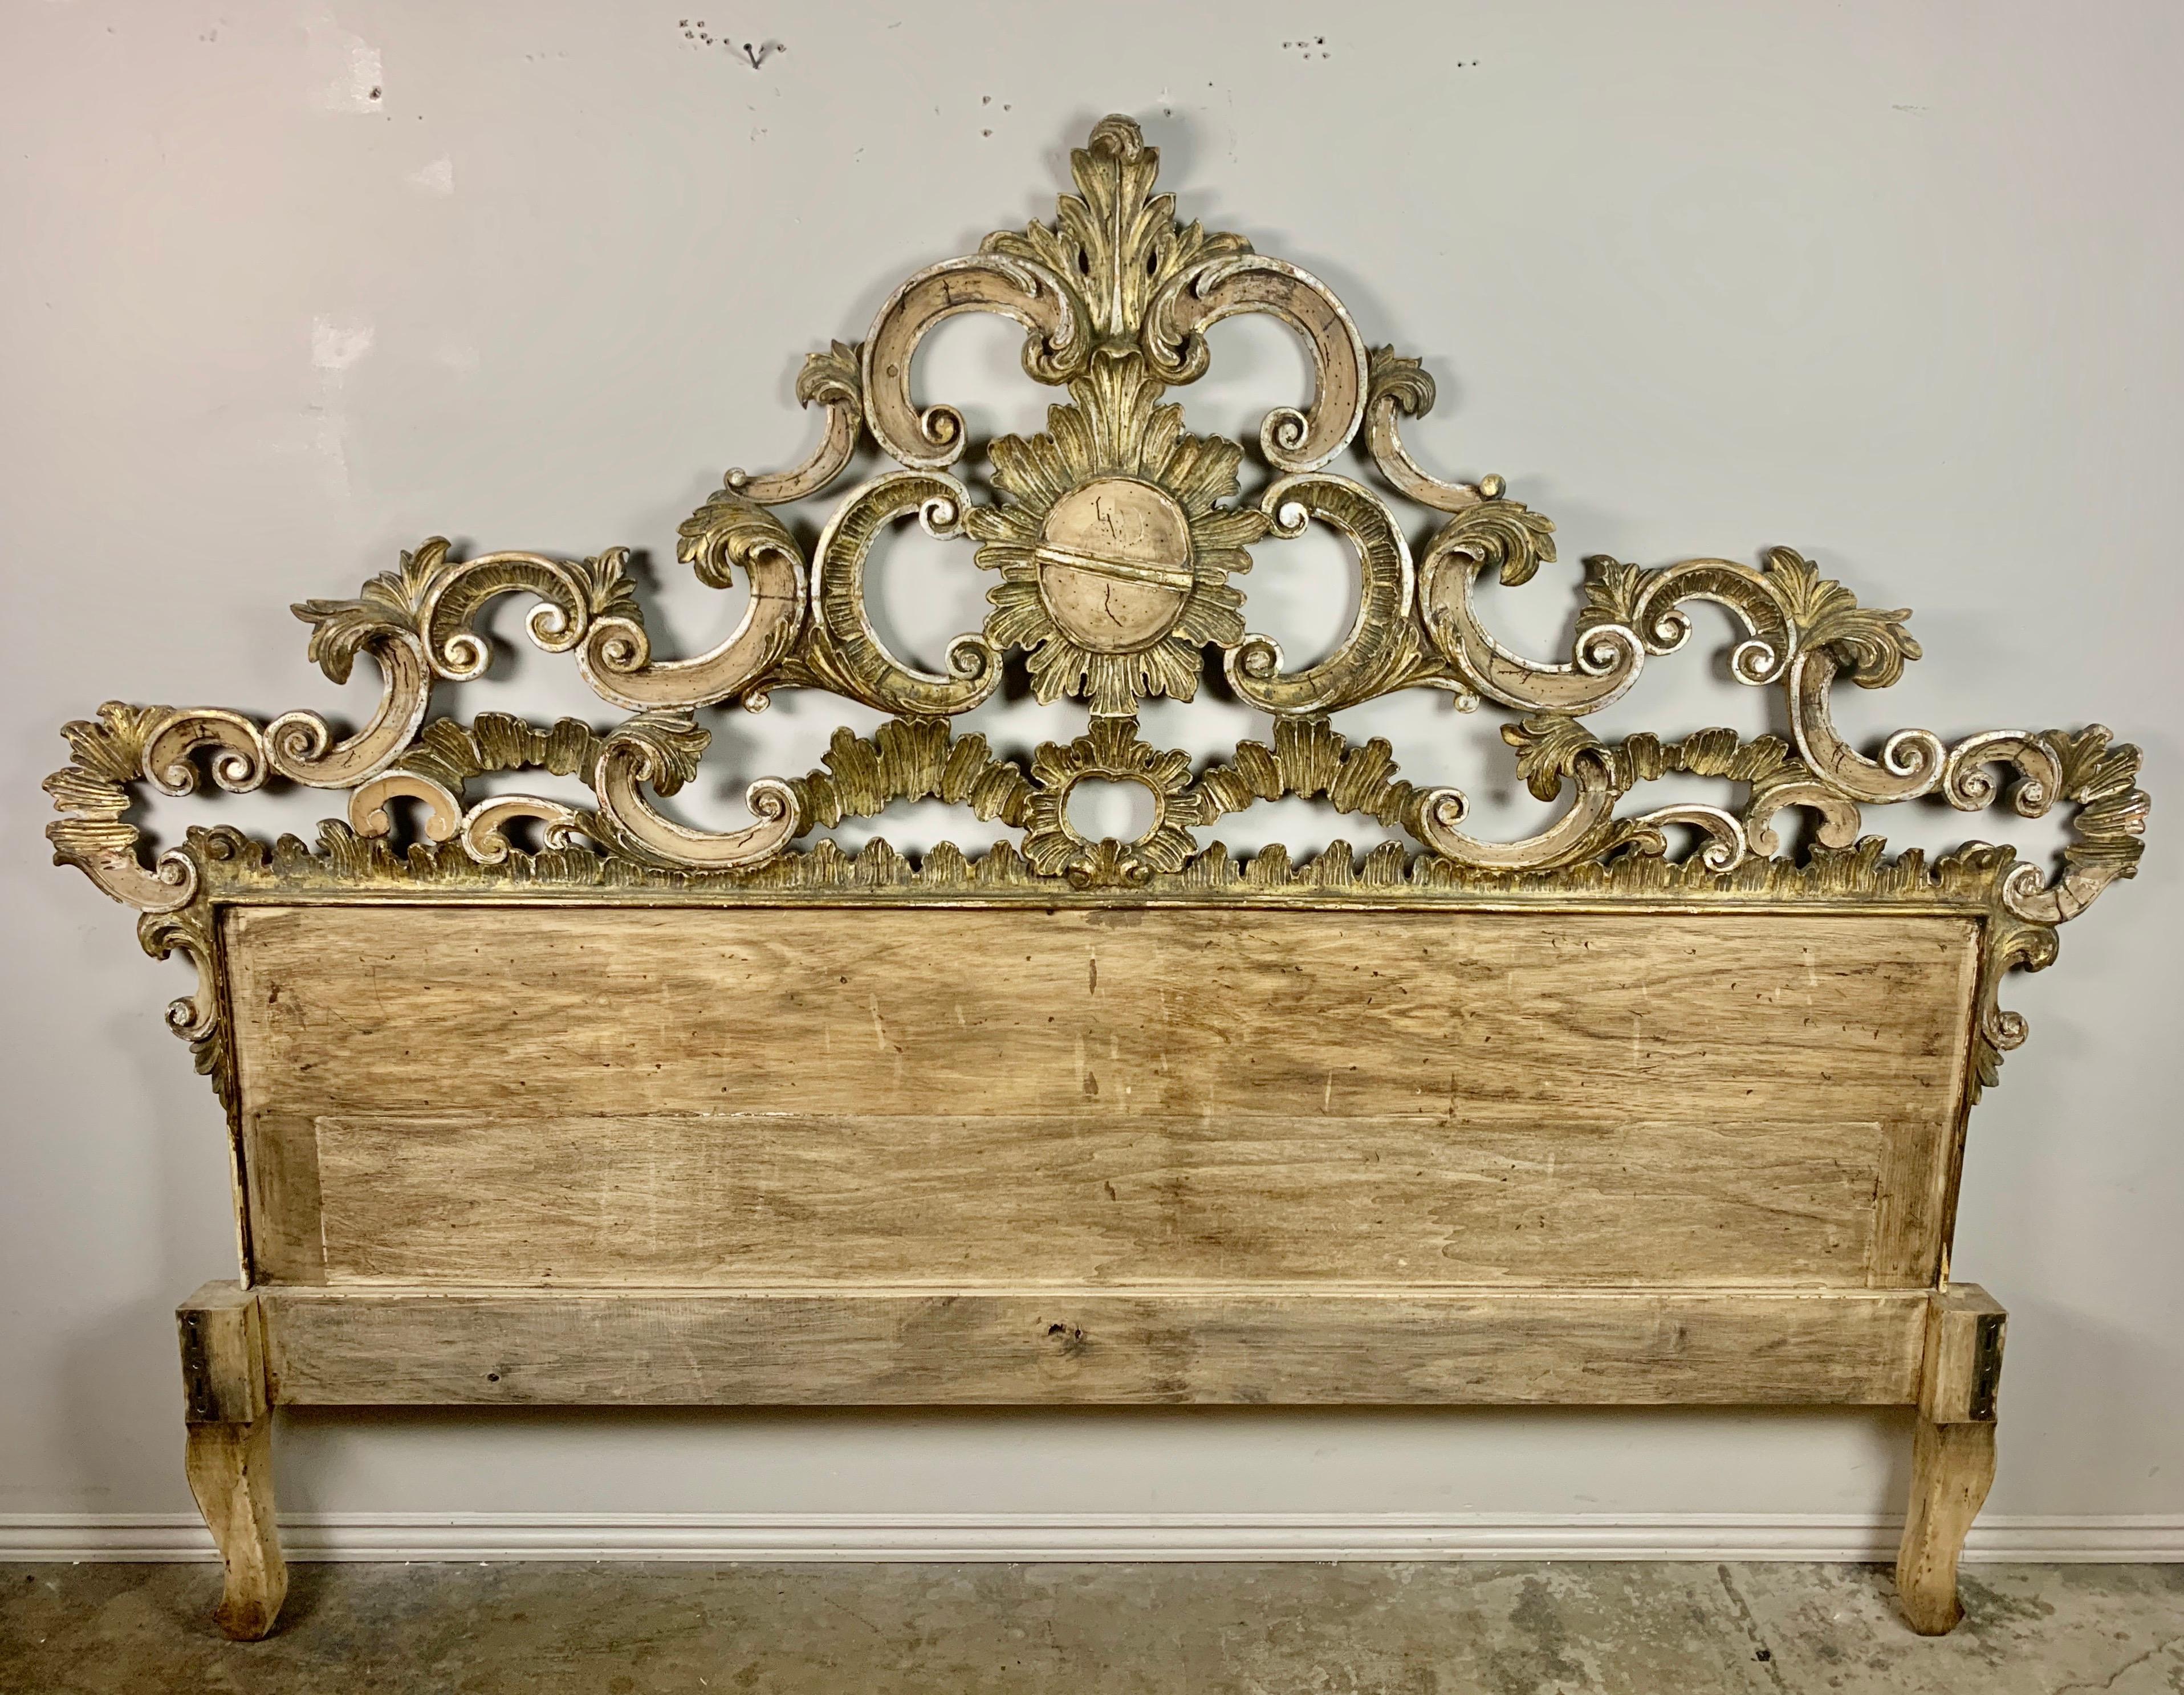 Carved wood Rococo style headboard with a center cartouche surrounded by swirling scrolls and acanthus leaves throughout. The painted and parcel gilt finish on this headboard is beautiful in every way. It is mainly natural bleached wood with